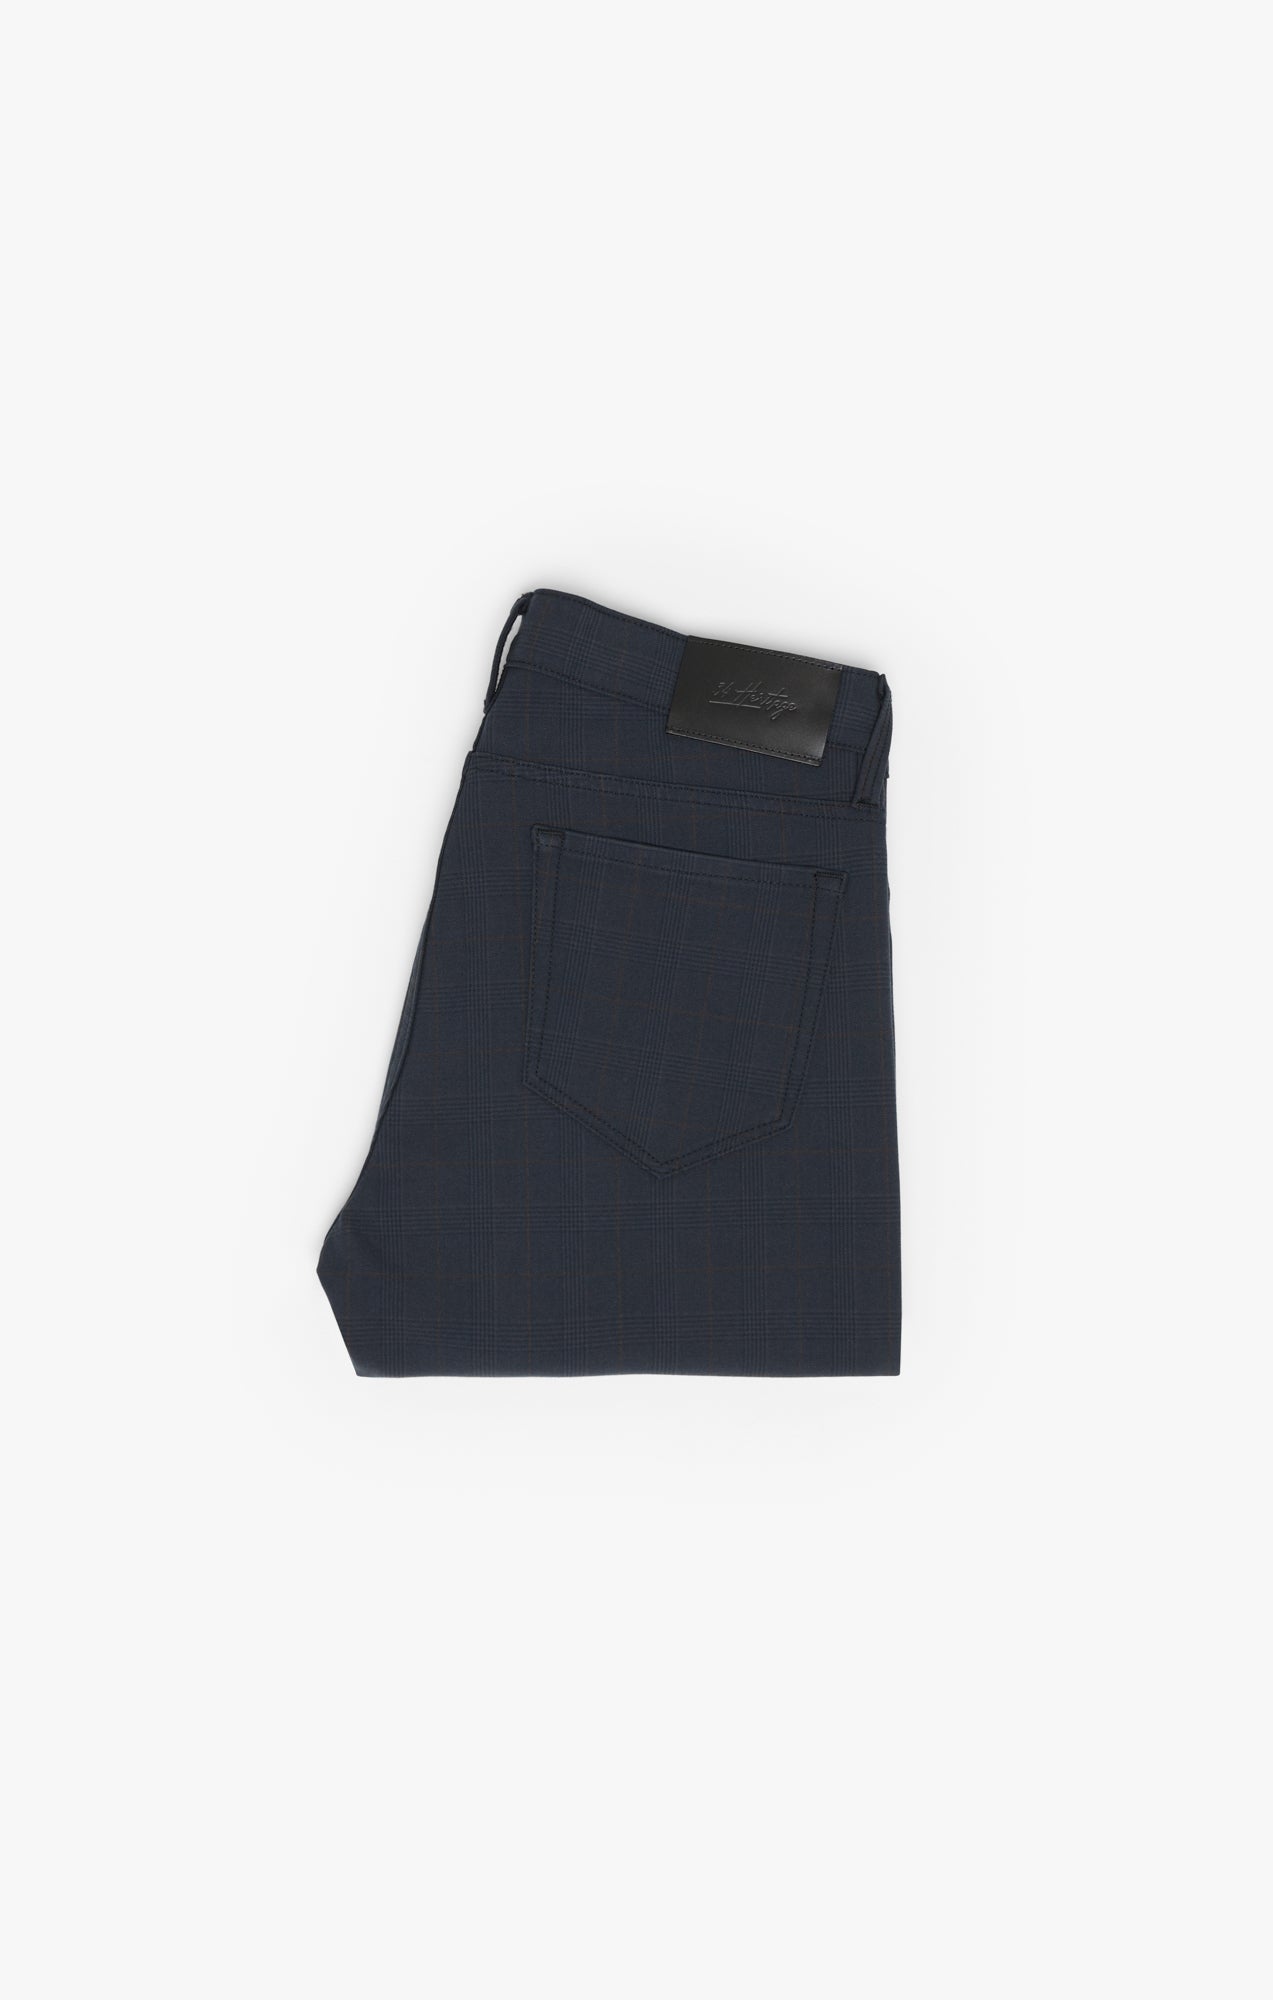 Cool Tapered Leg Pants In Navy Elite Check Image 9